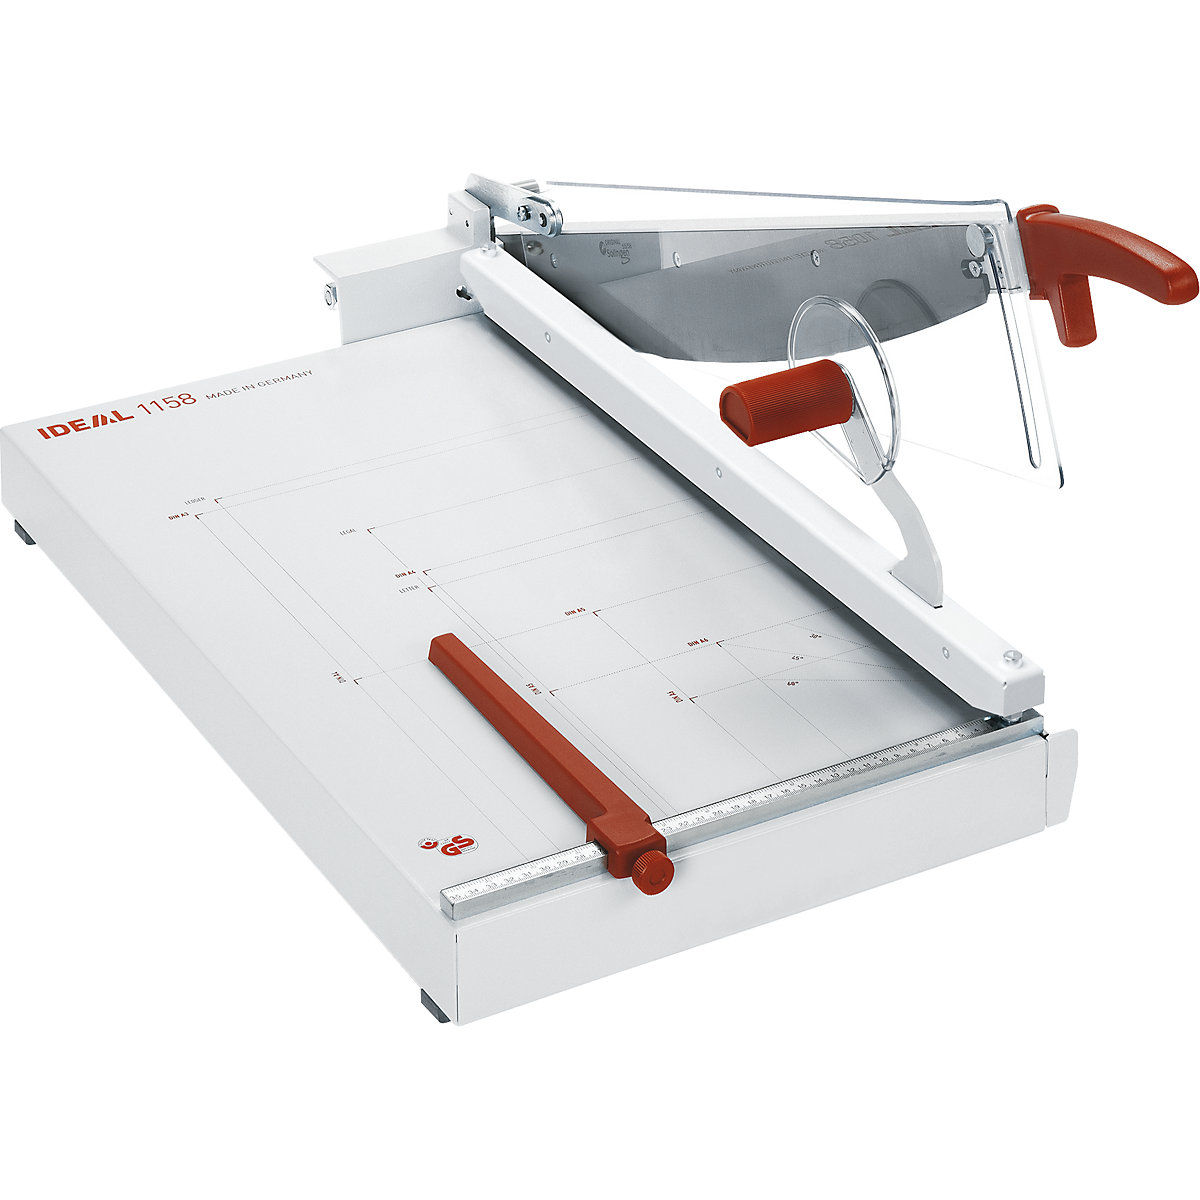 IDEAL 1158 lever guillotine – IDEAL